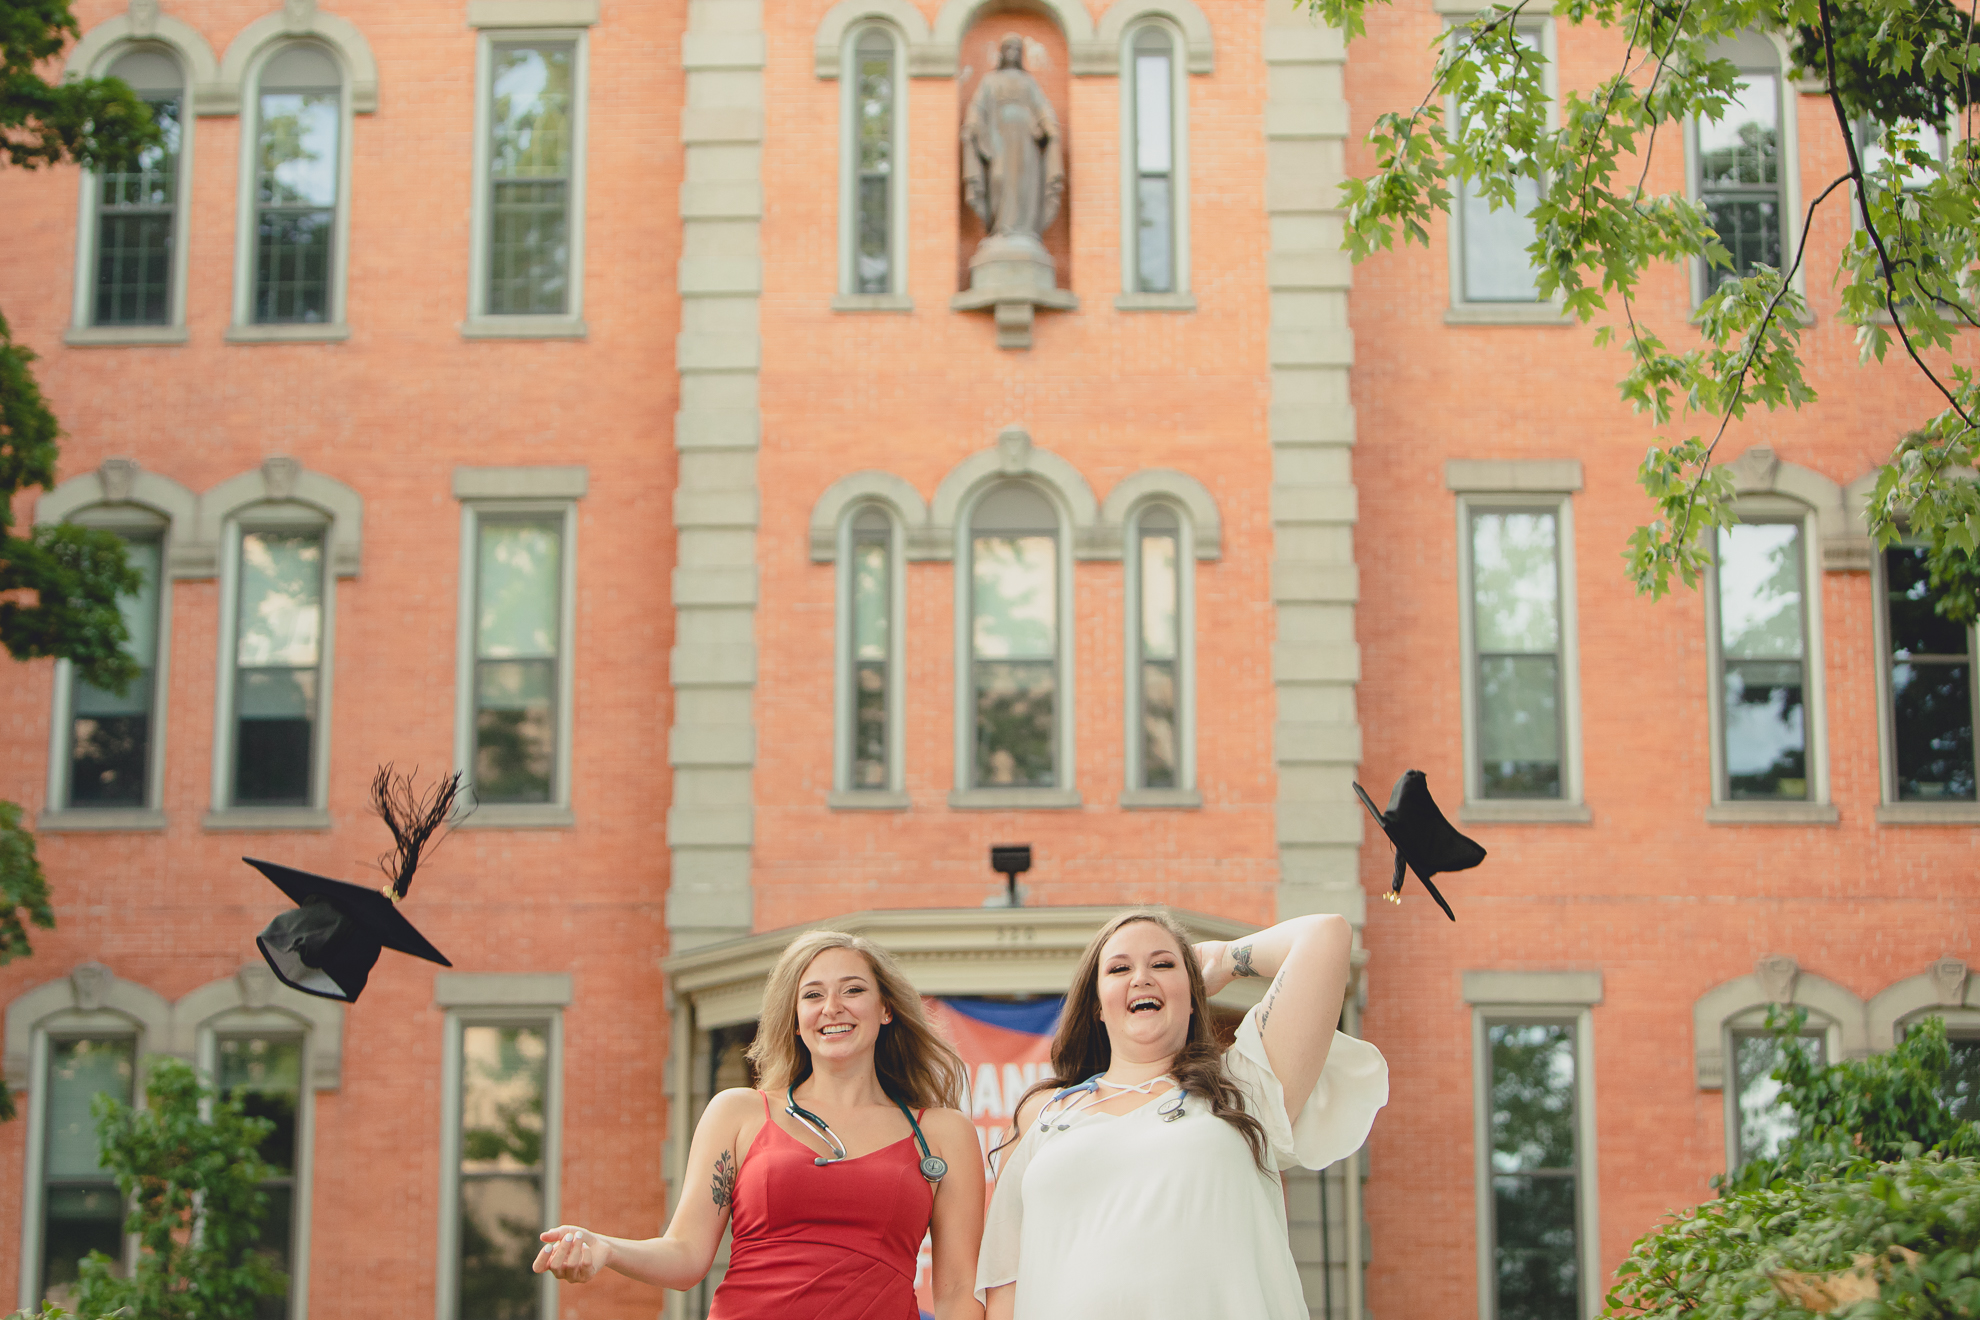 D'youville nursing students throw caps in air during senior graduation portrait photography session in Buffalo, NY